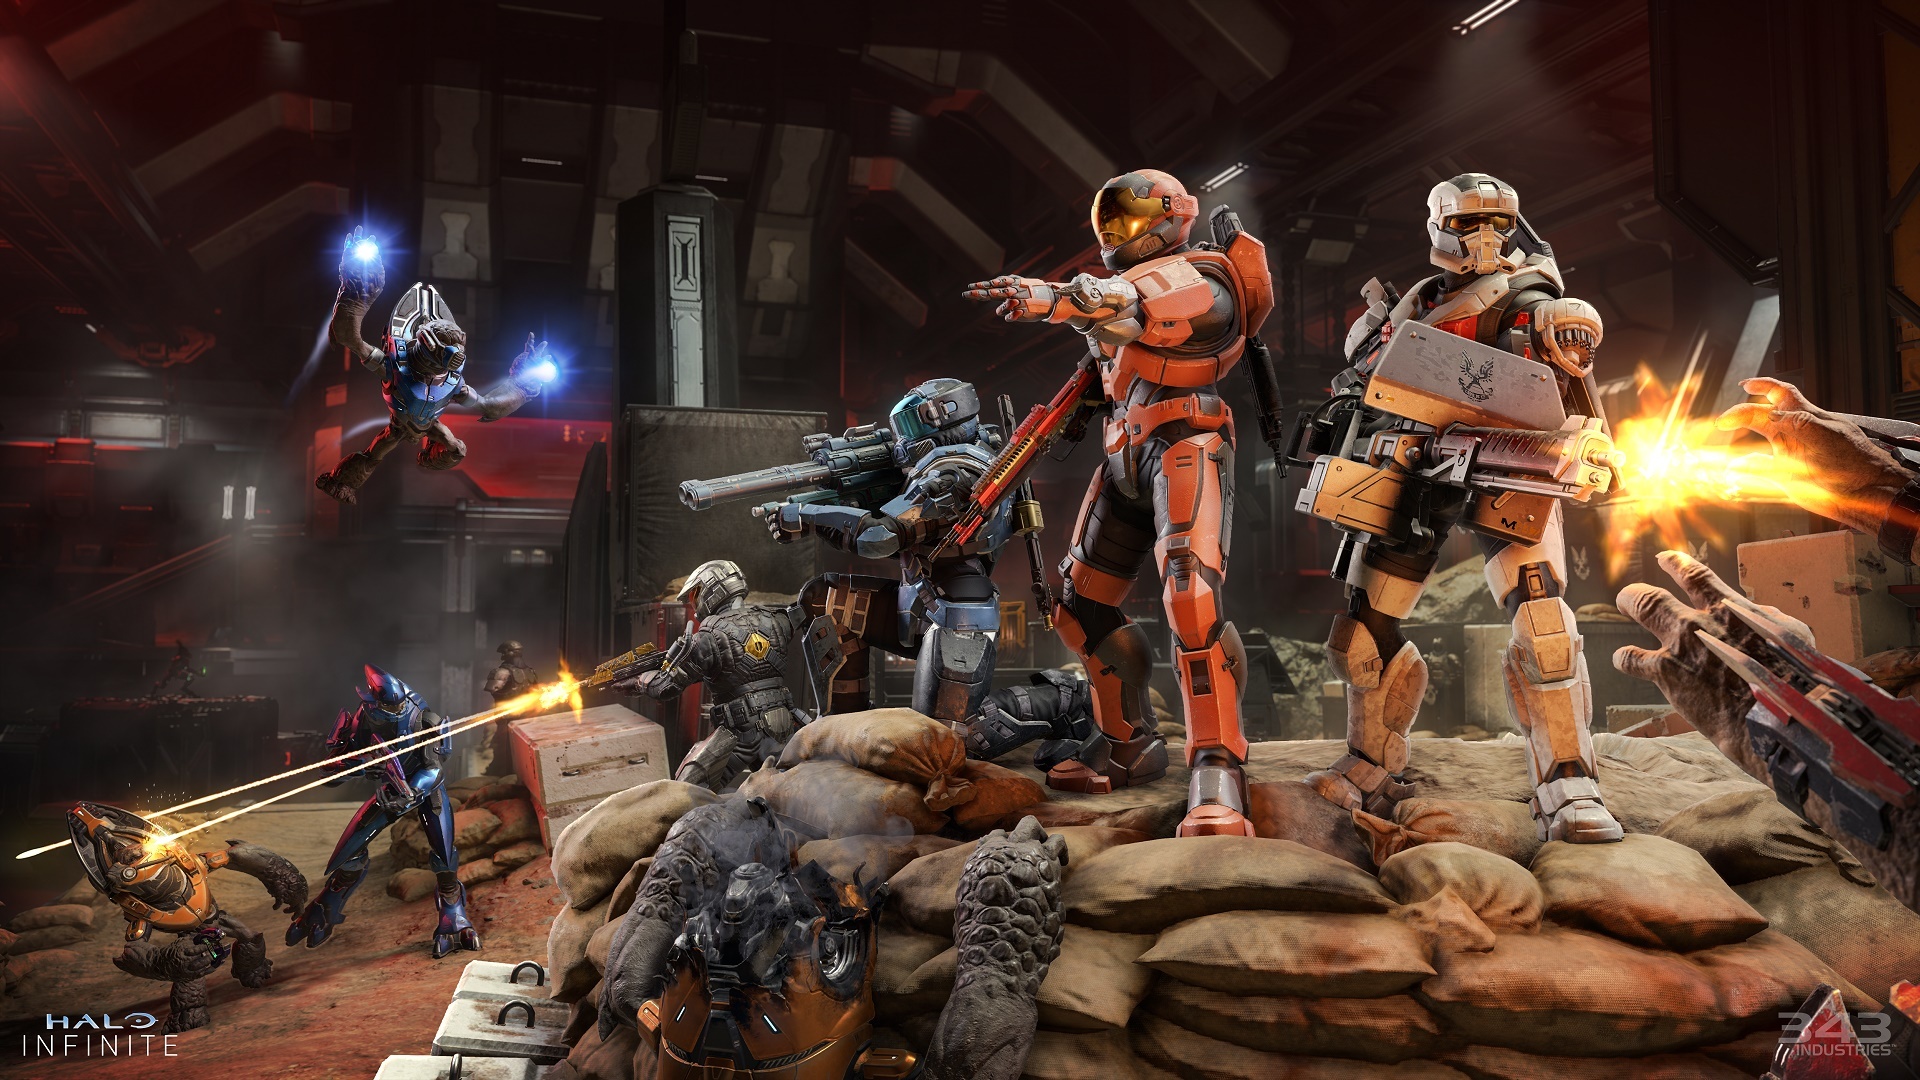 Gears 5 Horde Mode Revamps with Ultimates, Cross Platform and Halo: Reach